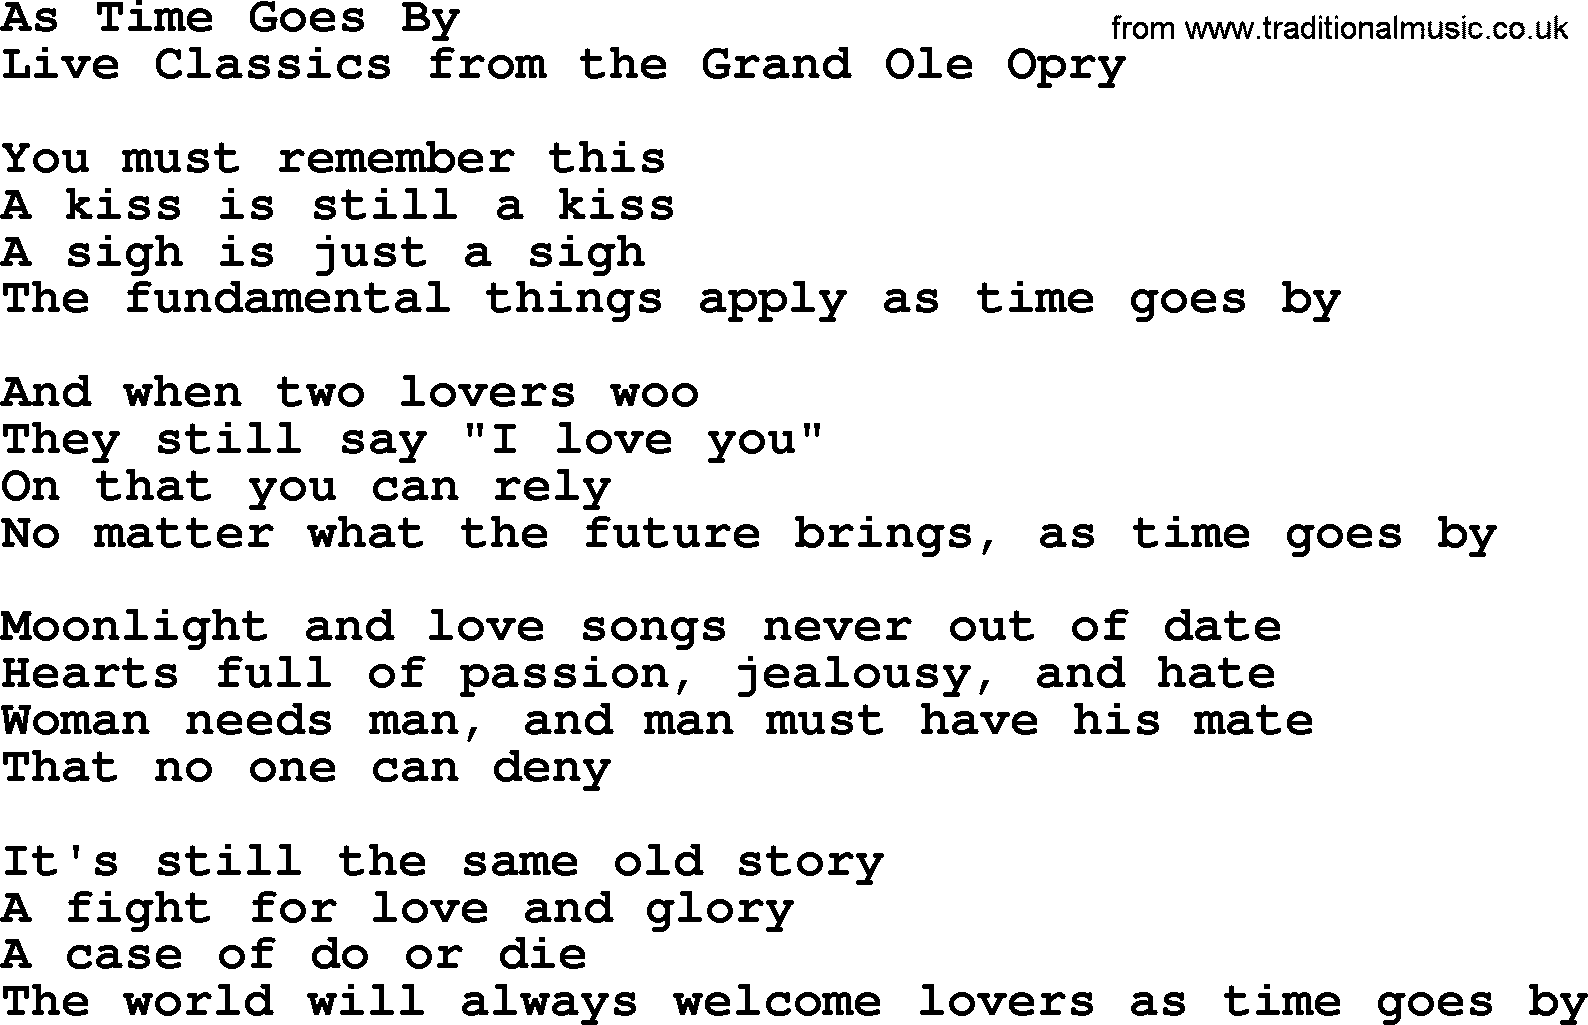 Marty Robbins song: As Time Goes By, lyrics